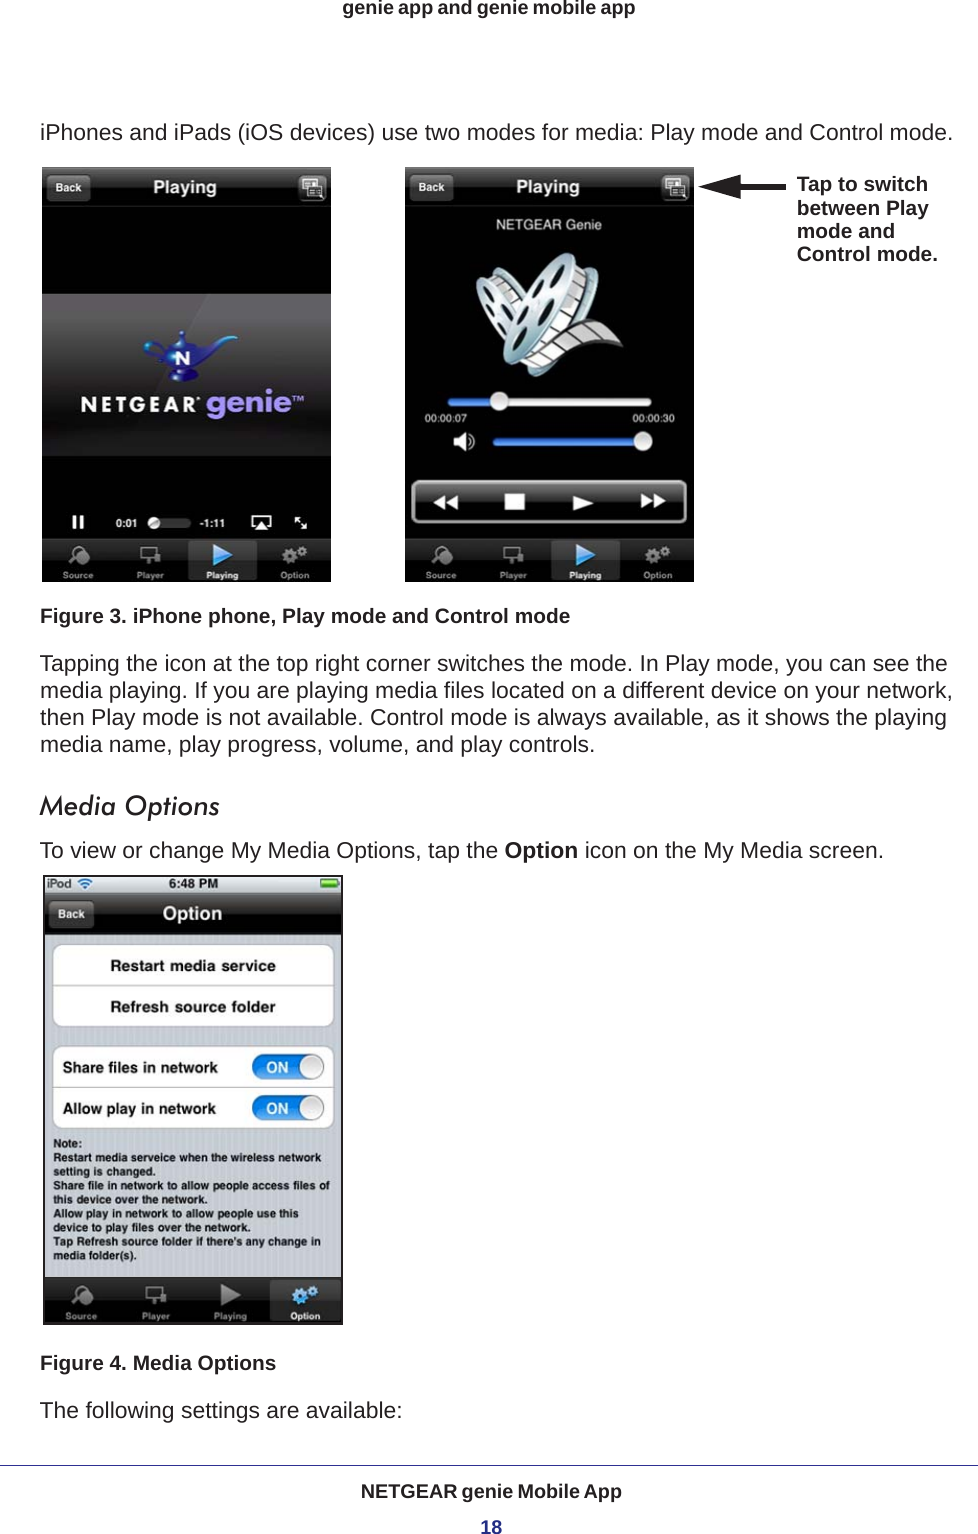 NETGEAR genie Mobile App18genie app and genie mobile app iPhones and iPads (iOS devices) use two modes for media: Play mode and Control mode. Tap to switchbetween Playmode and Control mode.Figure 3. iPhone phone, Play mode and Control modeTapping the icon at the top right corner switches the mode. In Play mode, you can see the media playing. If you are playing media files located on a different device on your network, then Play mode is not available. Control mode is always available, as it shows the playing media name, play progress, volume, and play controls. Media OptionsTo view or change My Media Options, tap the Option icon on the My Media screen.Figure 4. Media OptionsThe following settings are available: